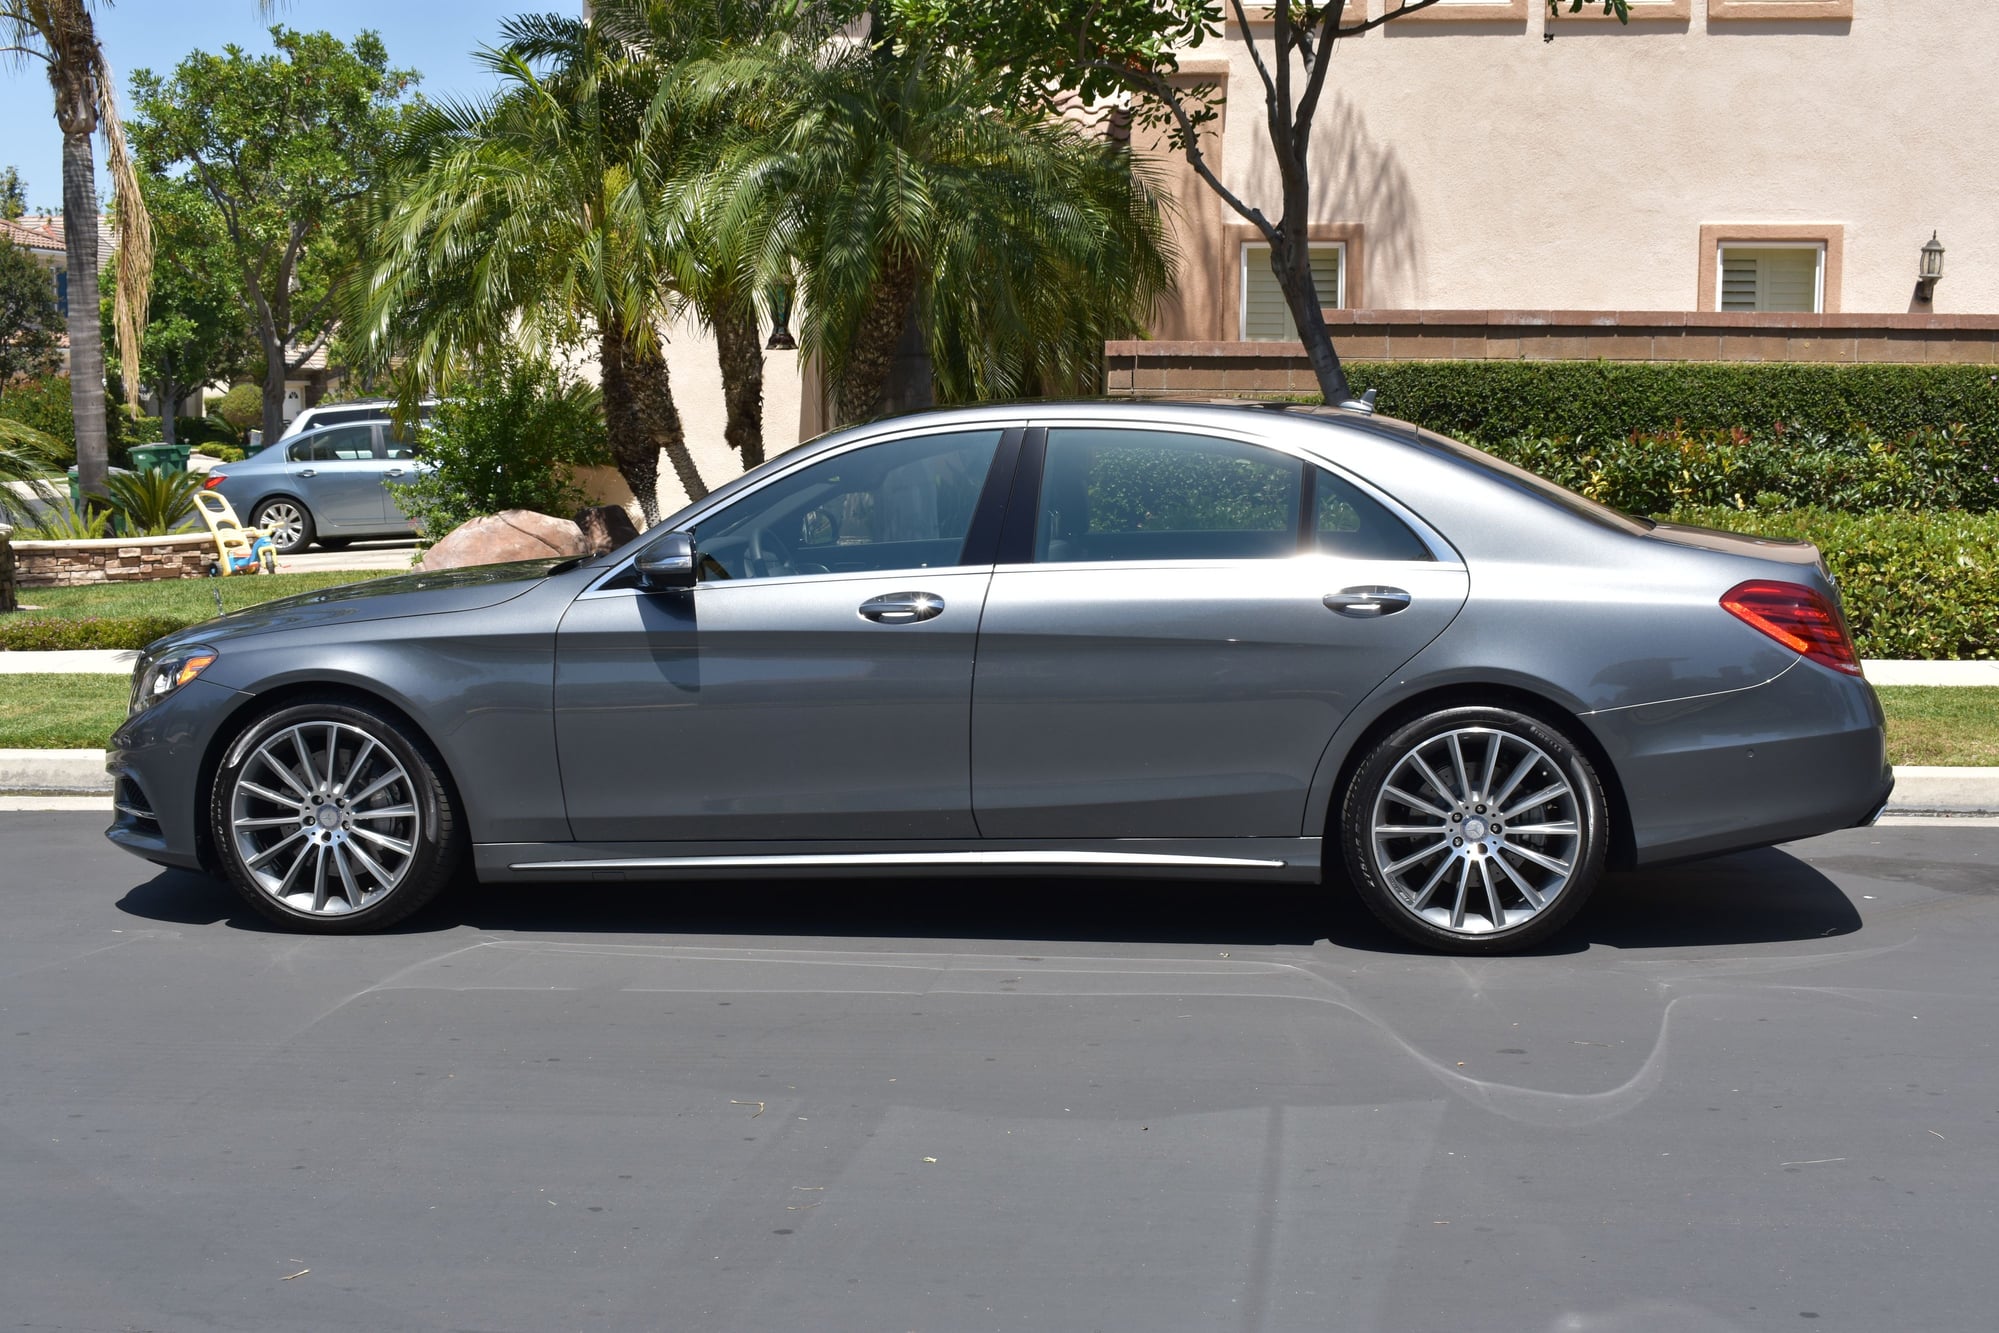 2017 Mercedes-Benz S550 - LIKE NEW 2017 MERCEDES-BENZ S550 (MOTIVATED SELLER) - Used - VIN WDDUG8CB0HA317443 - 800 Miles - 8 cyl - 4WD - Automatic - Sedan - Gray - Irvine, CA 92620, United States